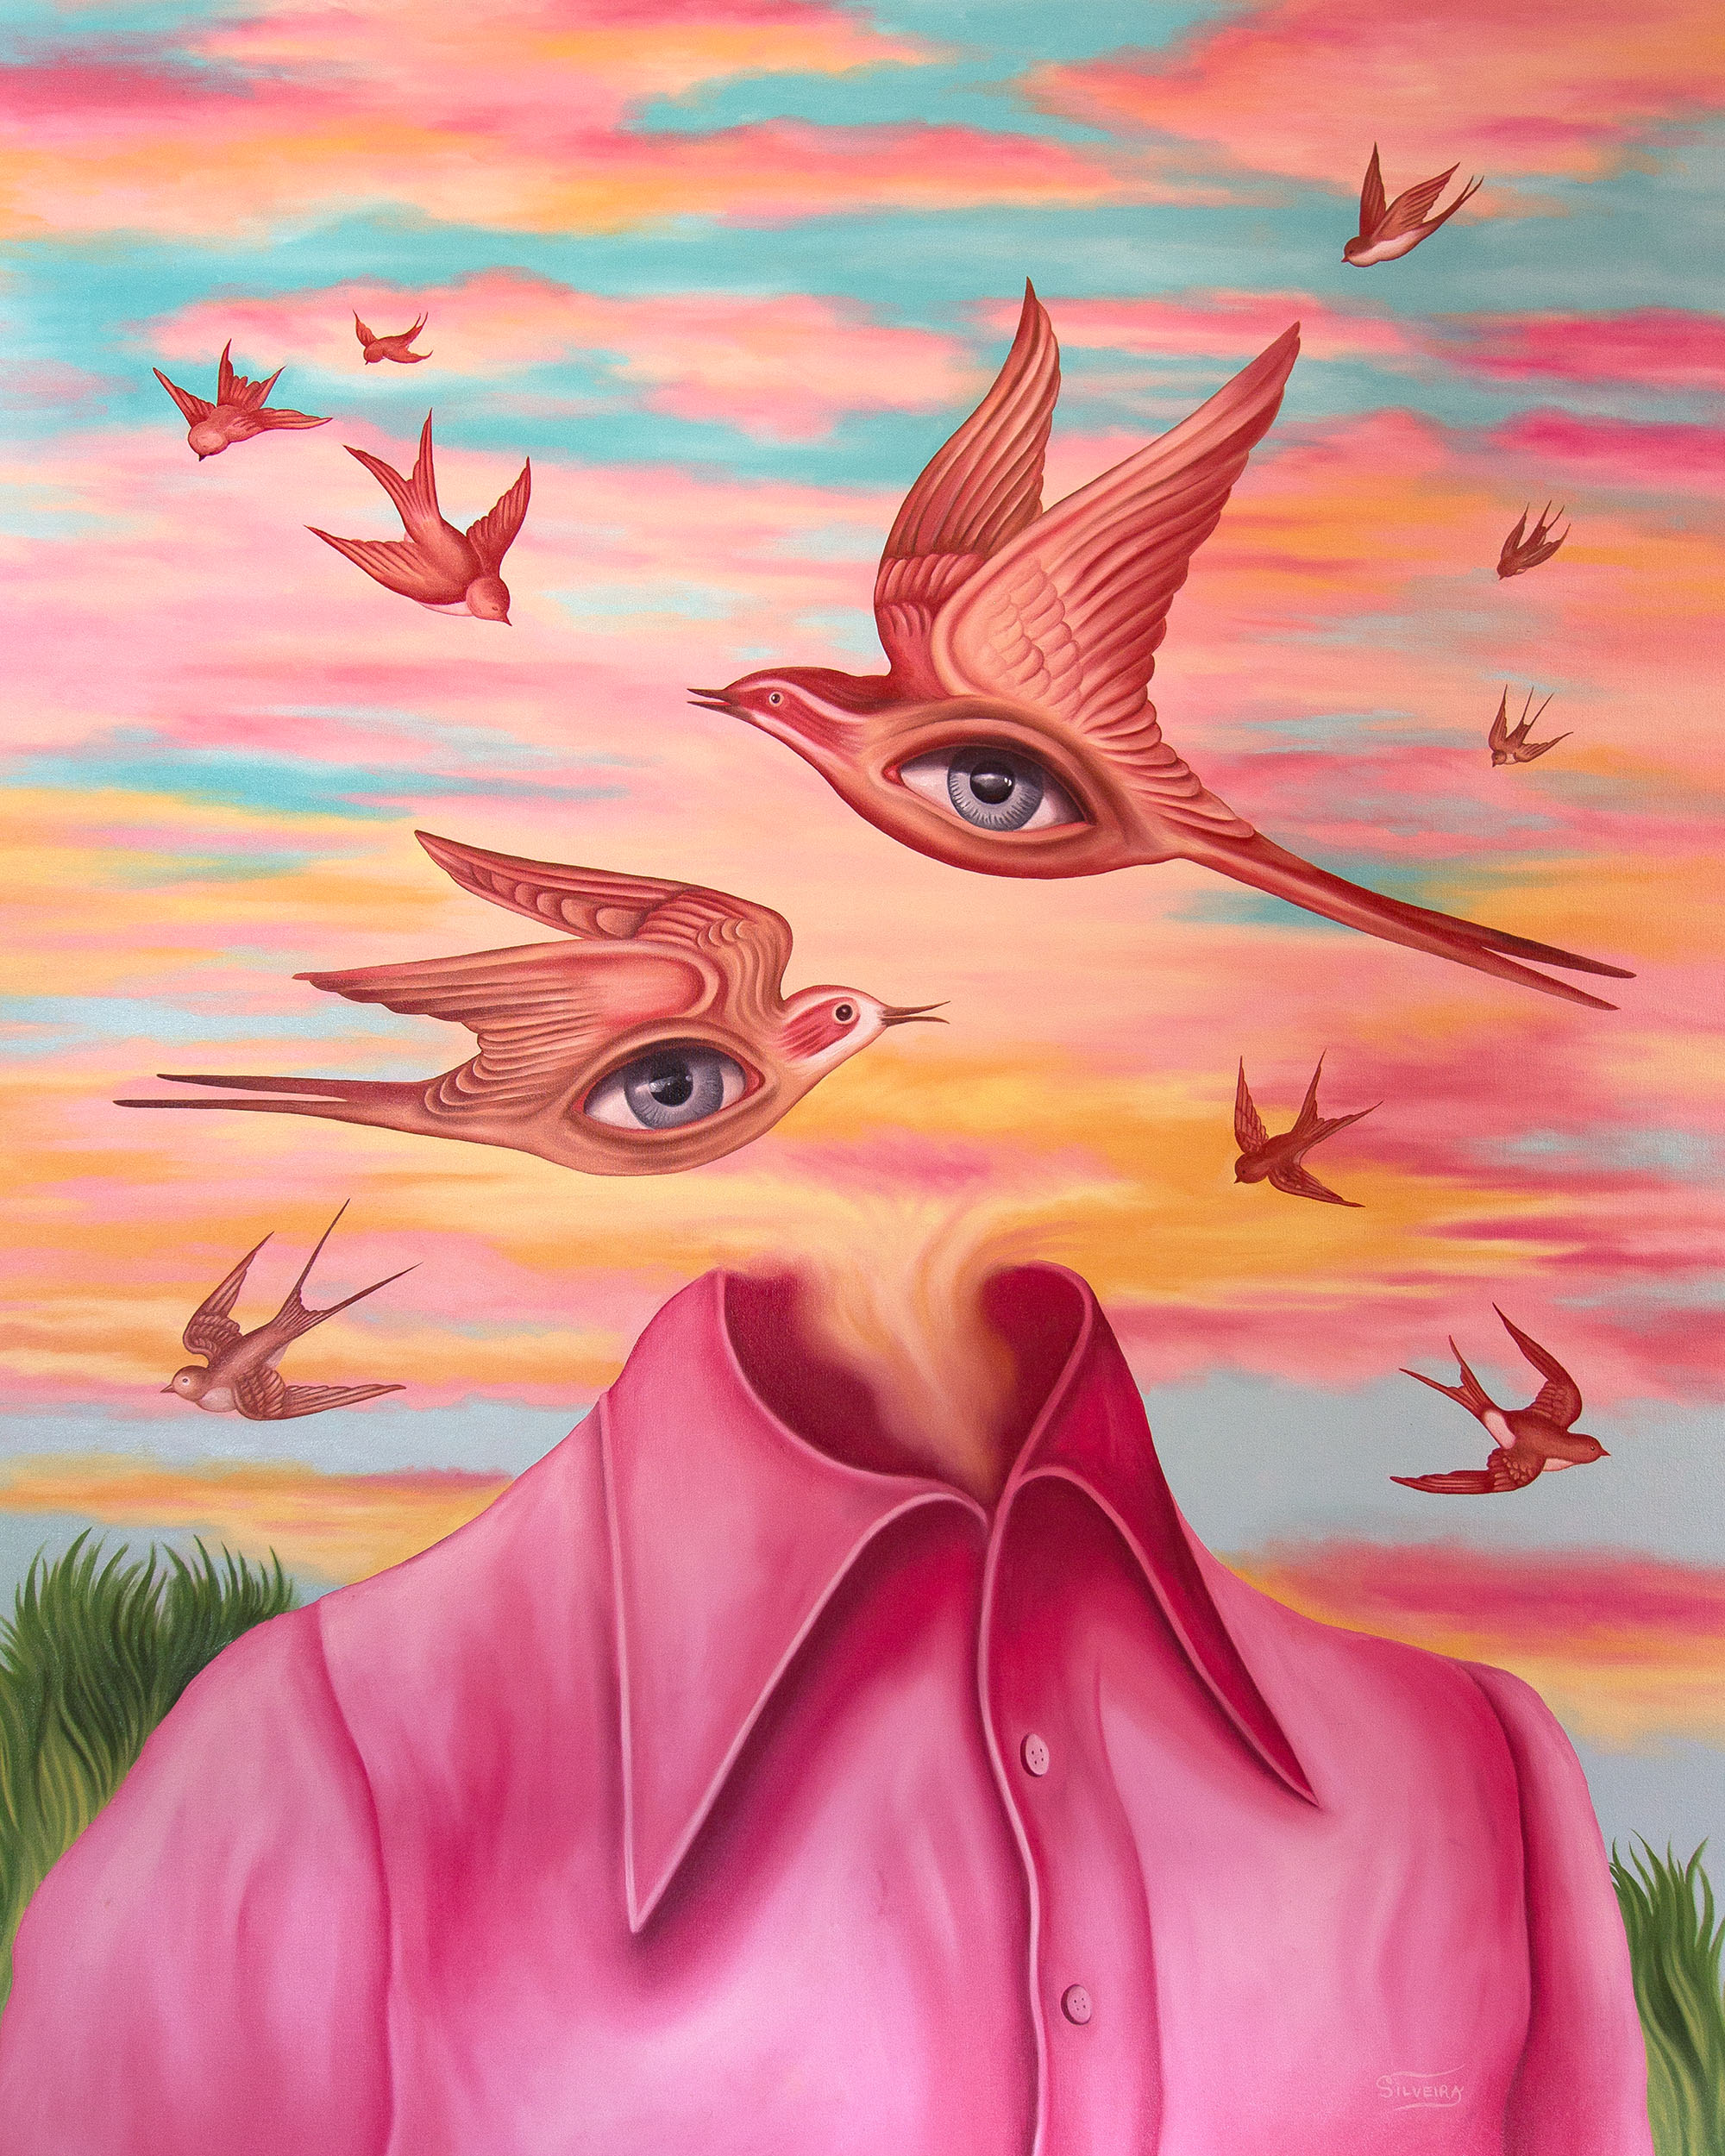 A vibrant and colorful portrait of a figure without a head, but instead birds flying nearby, with two eyeballs